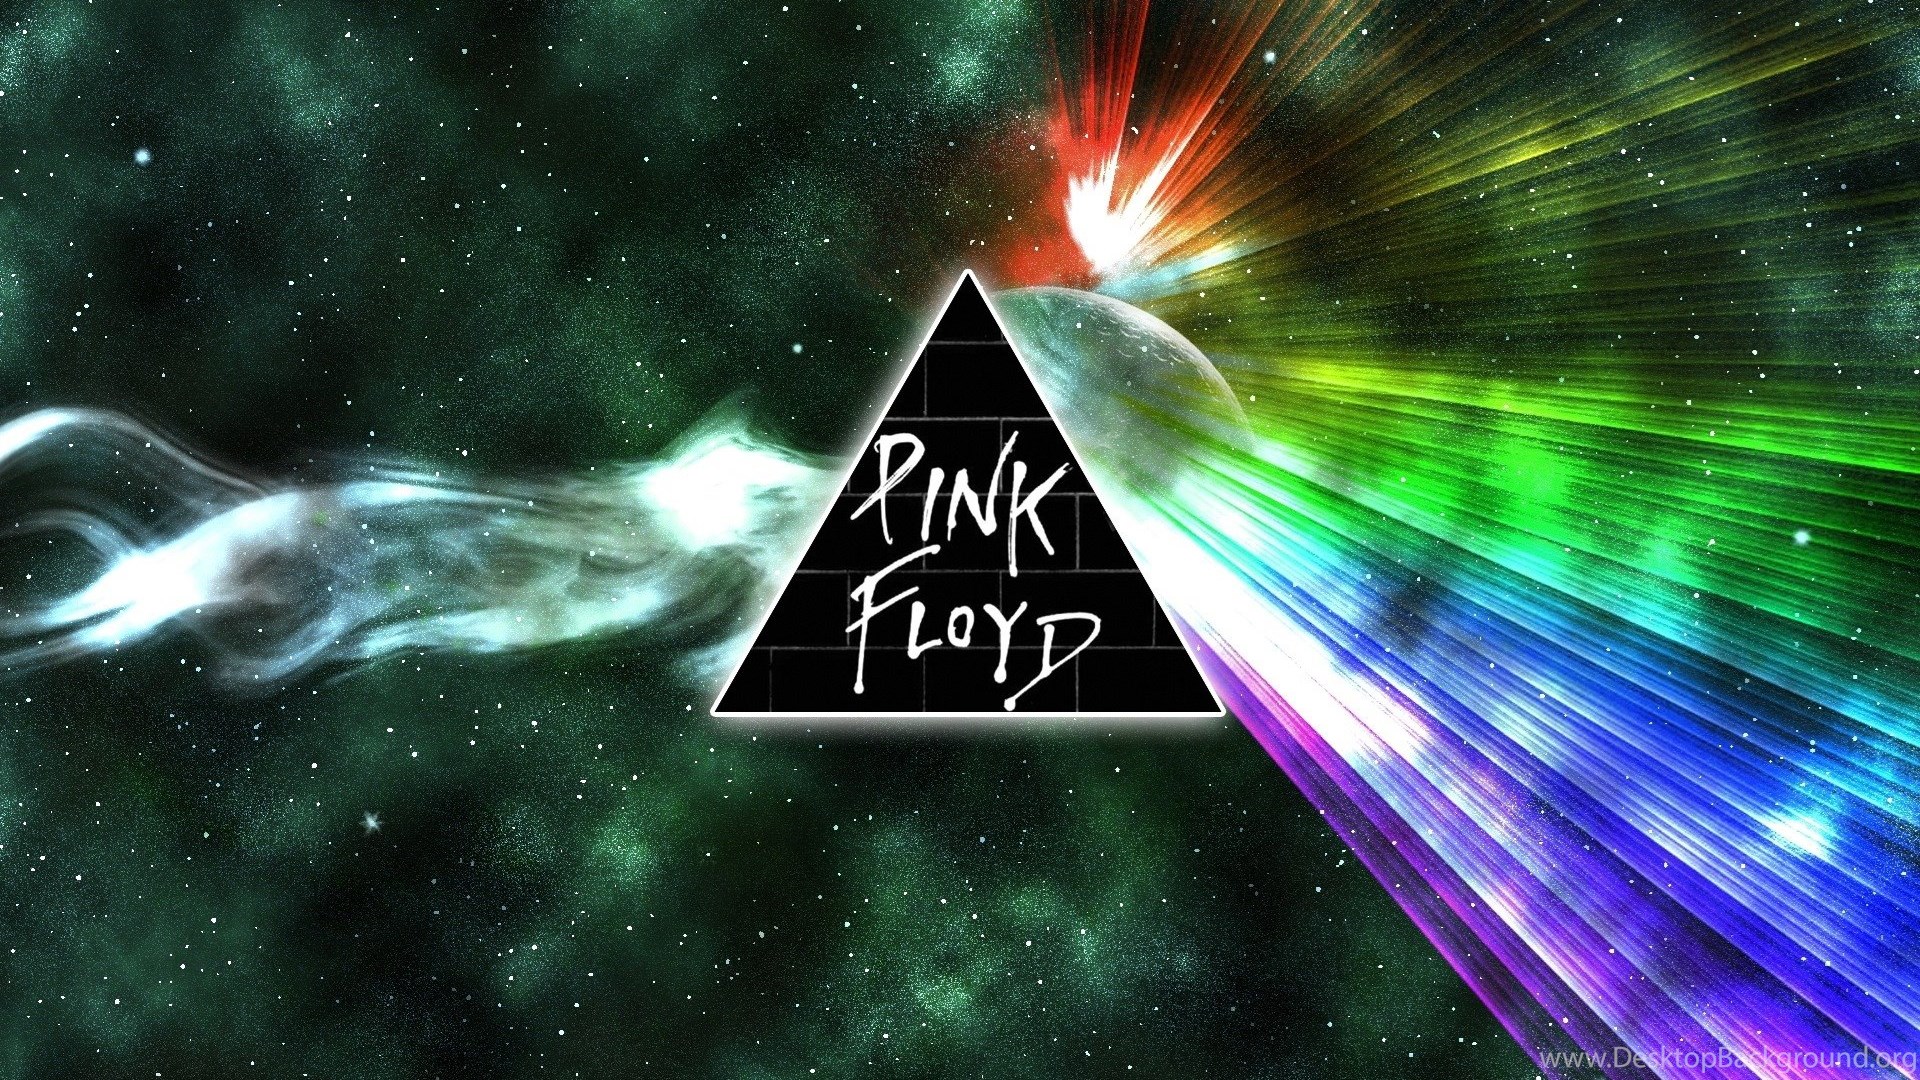 Hd Pink Floyd Dark Side Of The Moon Wallpapers And Photos Desktop